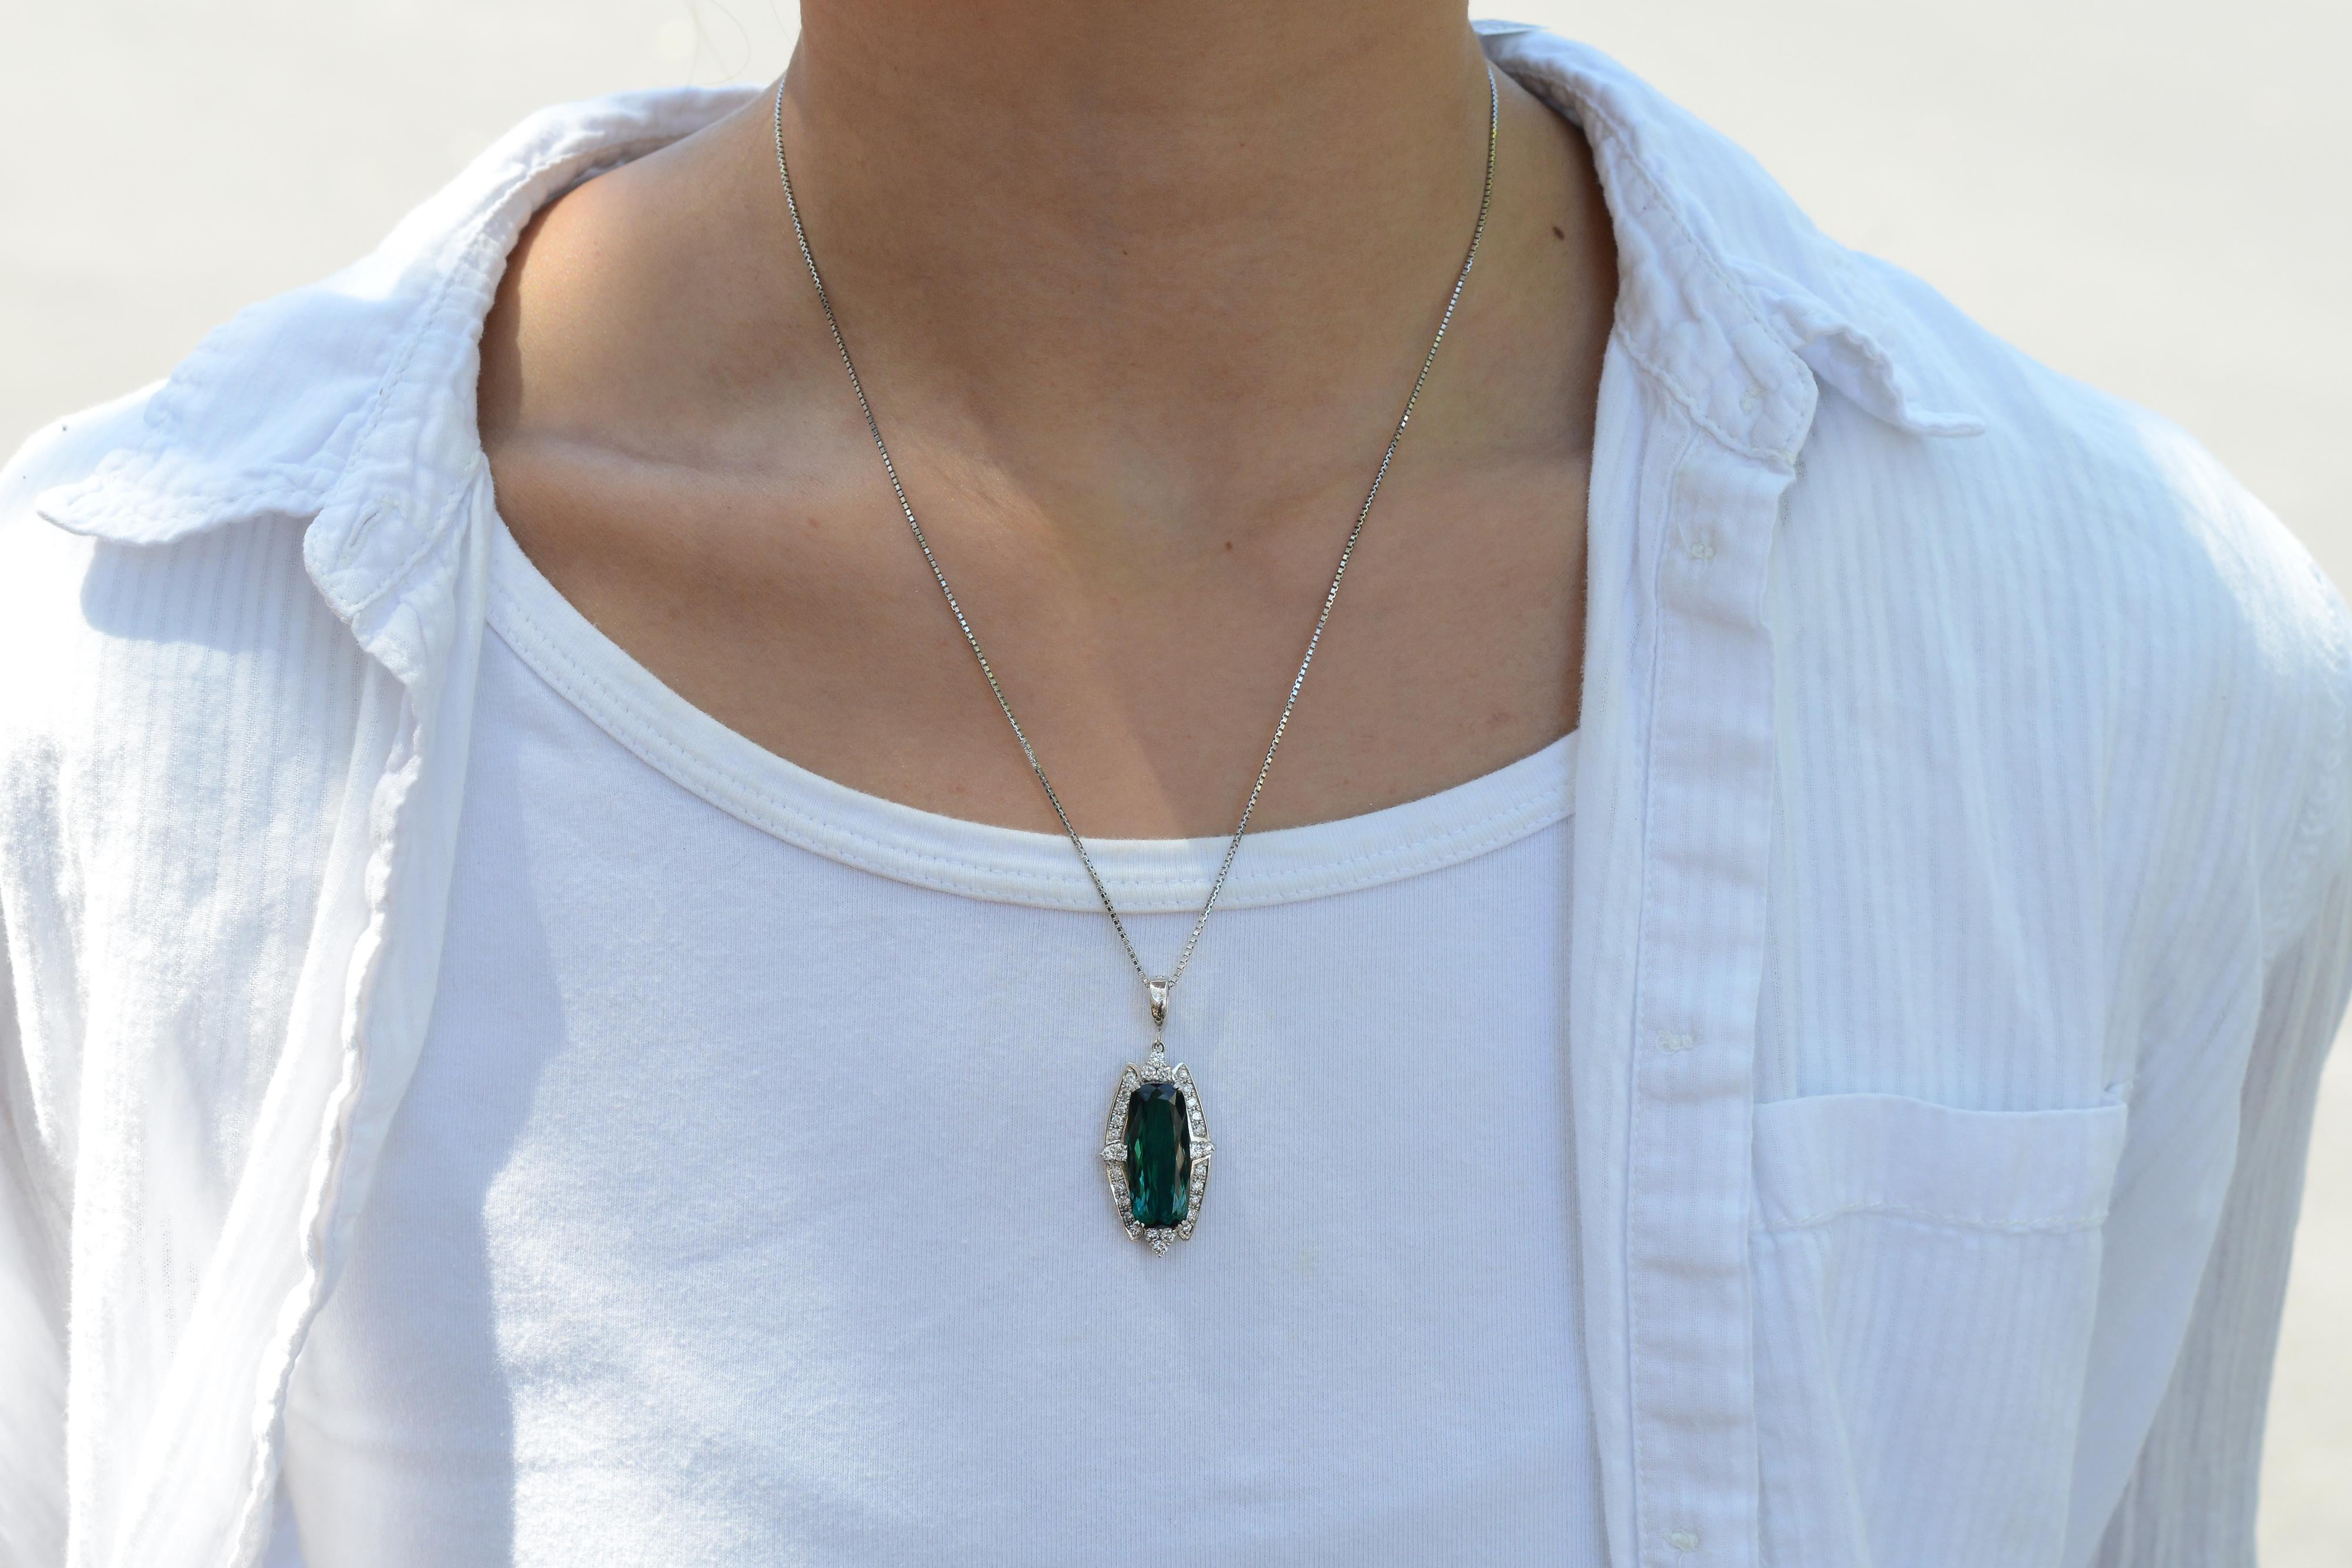 A classic contemporary pendant necklace presenting a transfixing 10.16 carat tourmaline set with lavish platinum. Its north-south design renders a balanced statement, while a mesmerizing bluish-green indicolite tourmaline with a Paraiba tone,